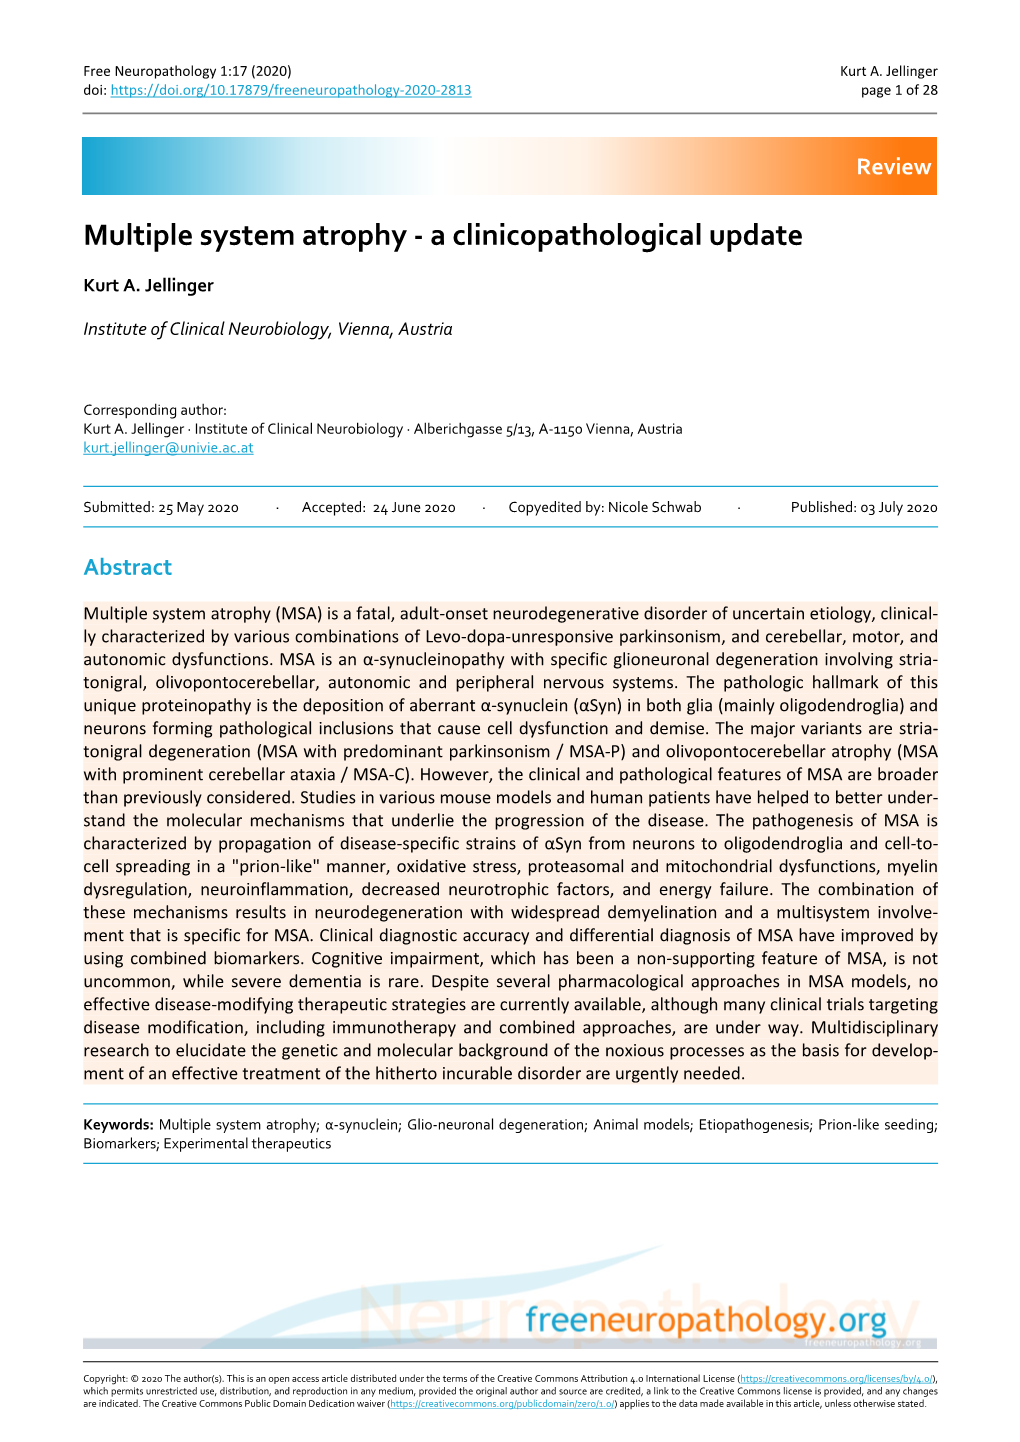 Multiple System Atrophy - a Clinicopathological Update